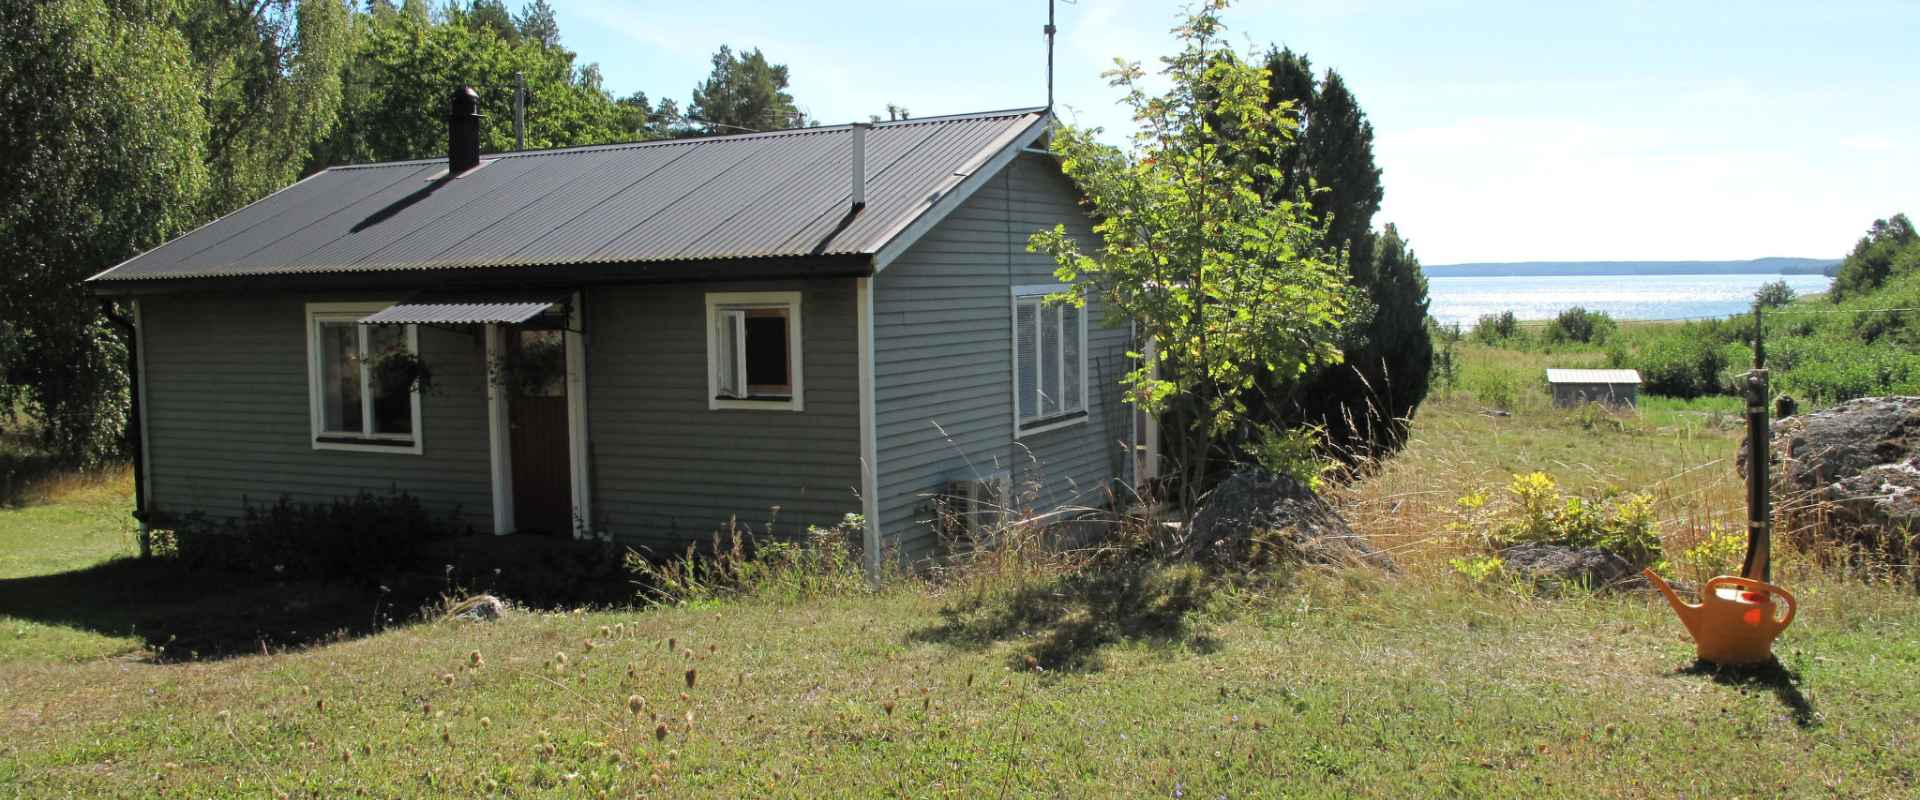 Lindby parlan (sth150)